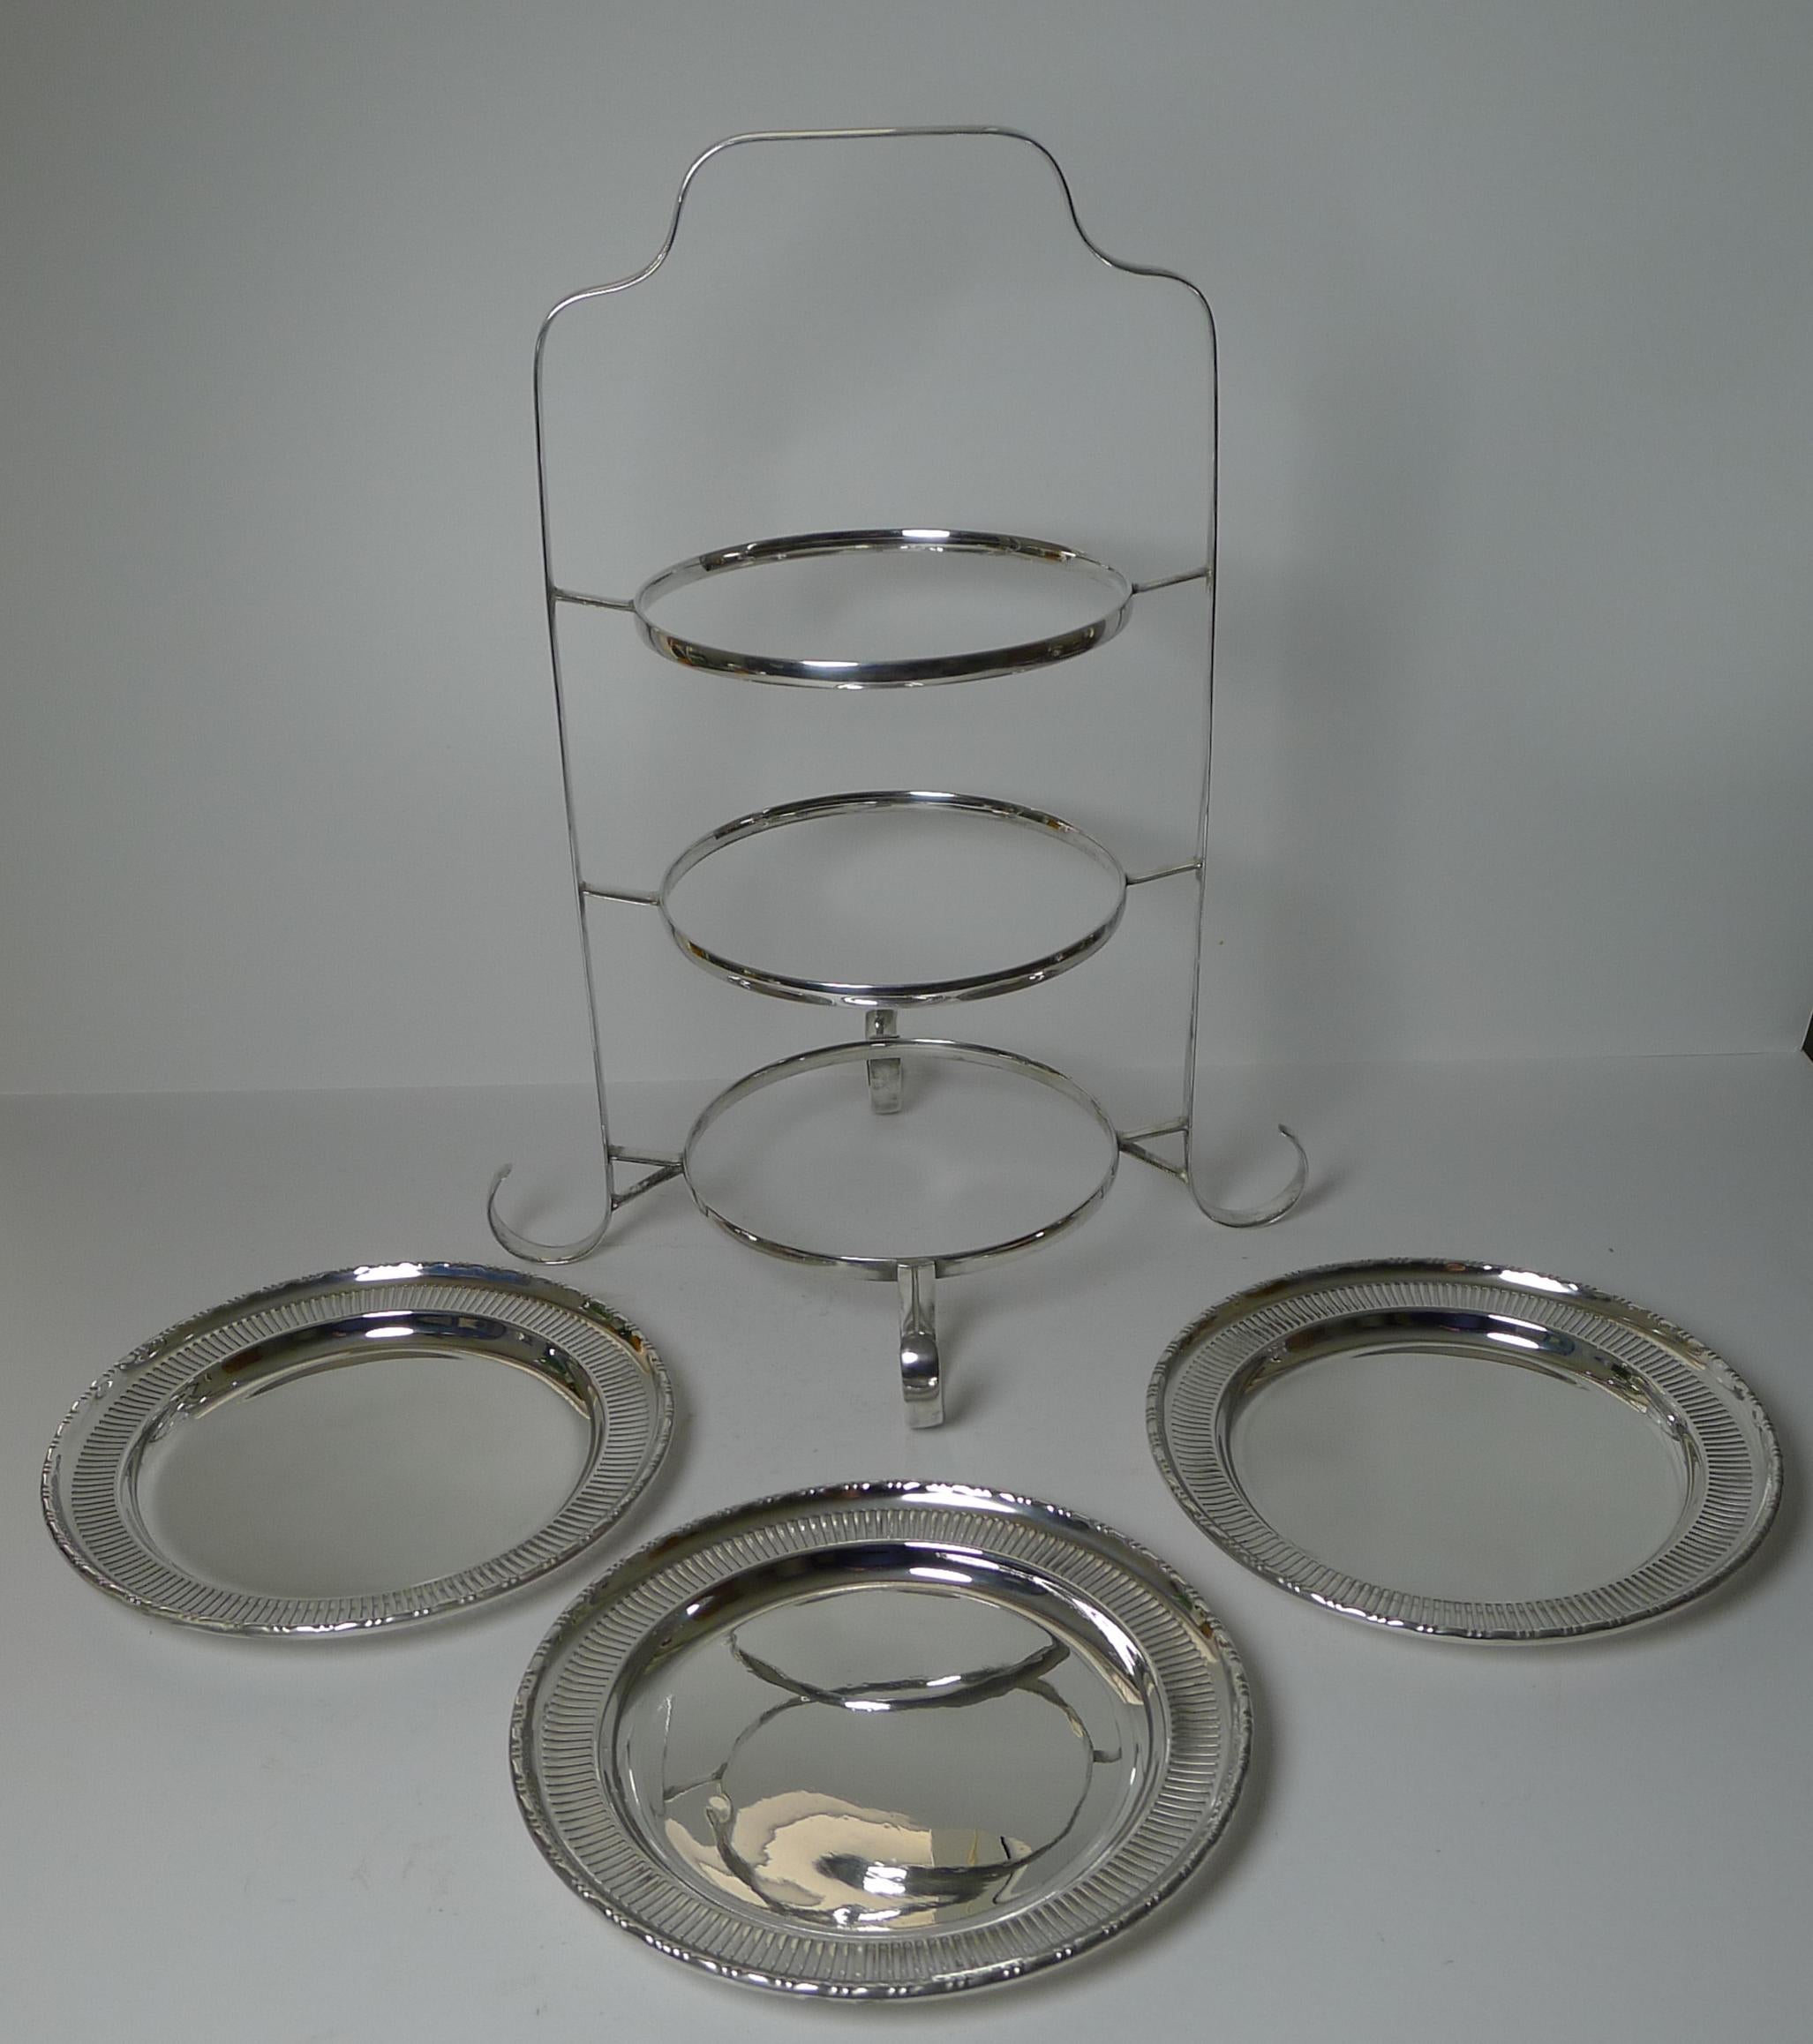 A beautiful English three-tier cake stand consisting of the stand and three circular removable plates; each plate with a pierced or reticulated border.

The stand and all three plates have matching maker's marks for Gladwin Ltd of Sheffield